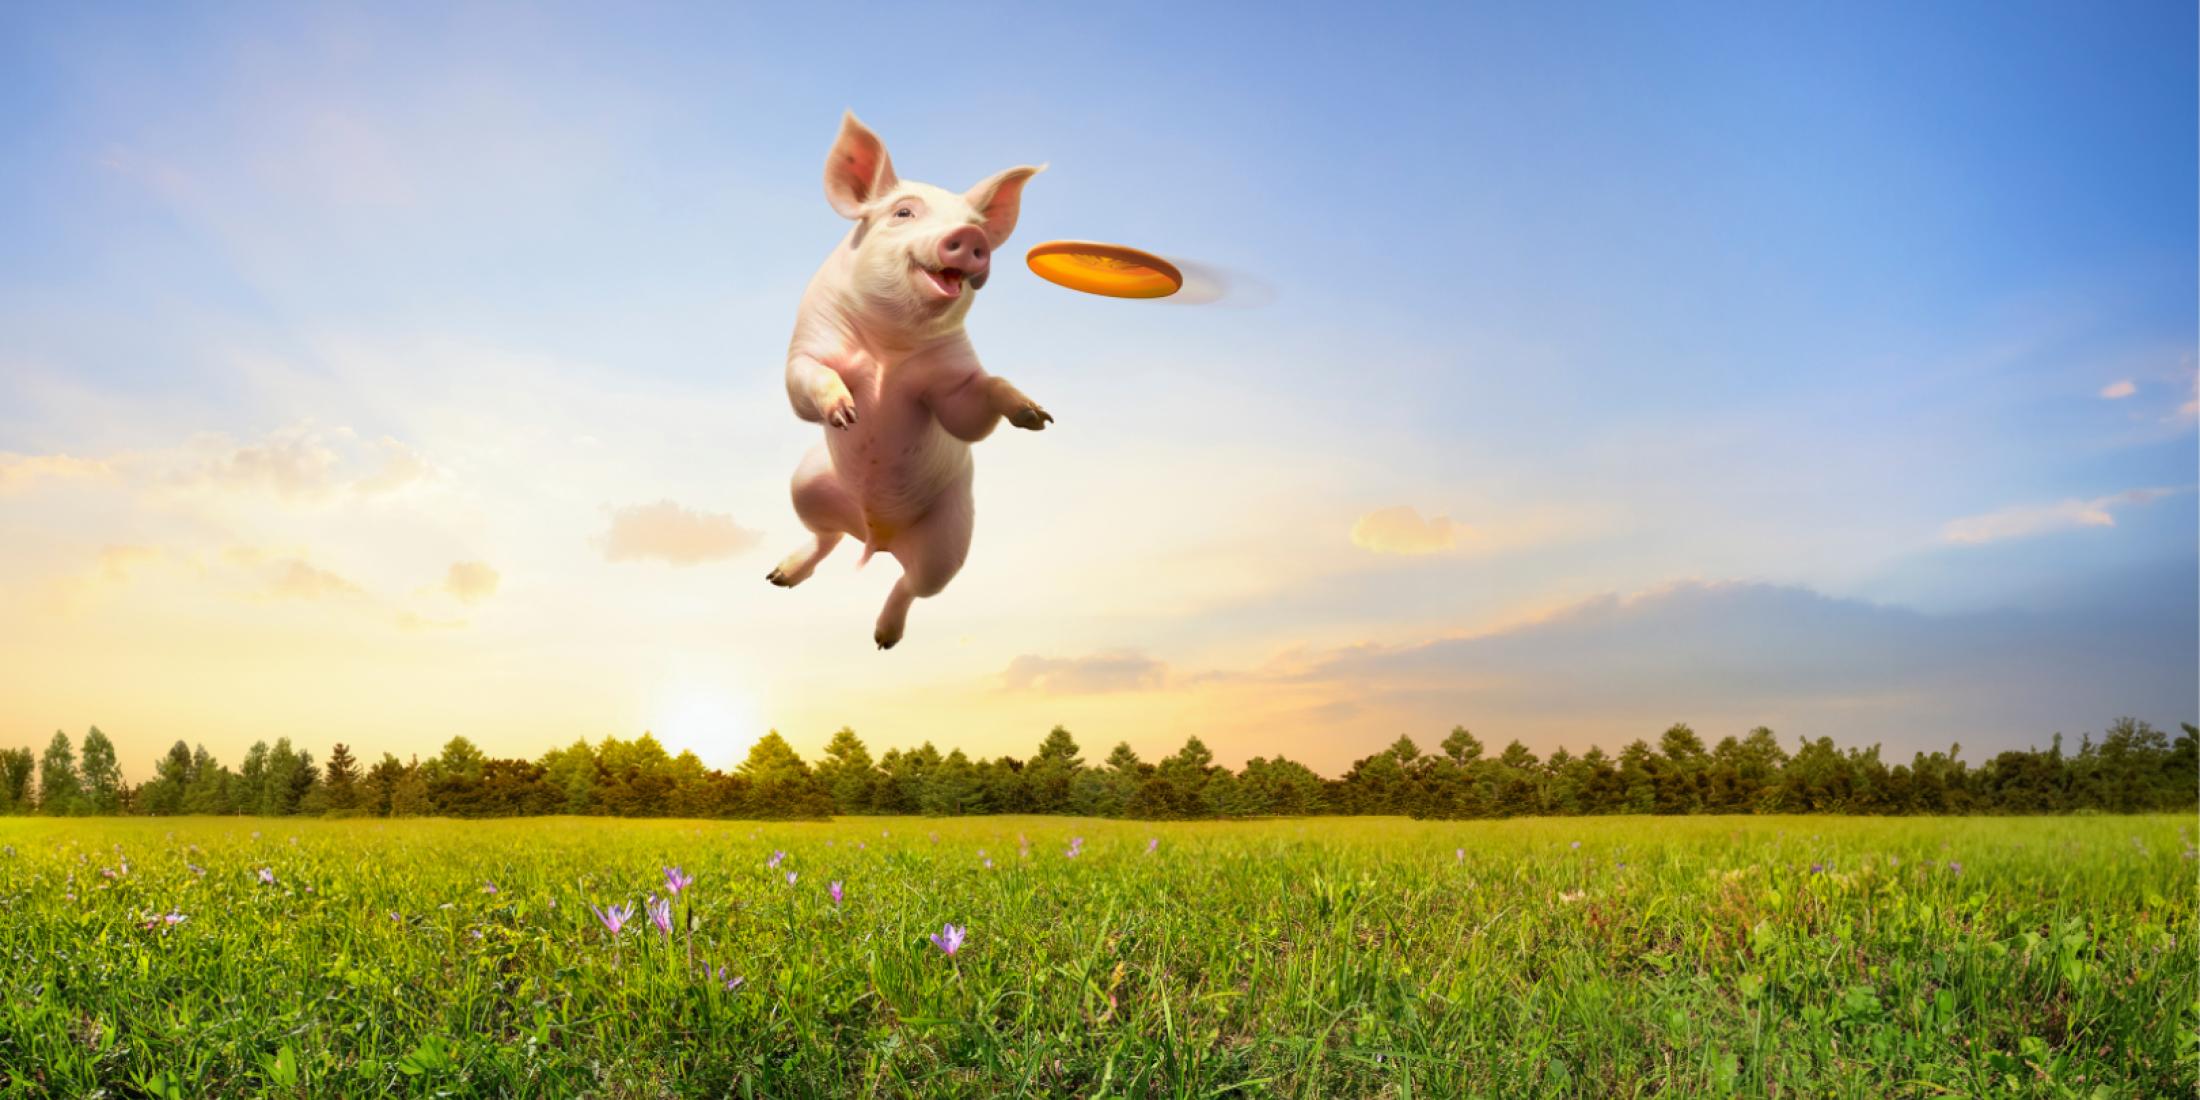 Pig in a field jumping to catch a frisbee